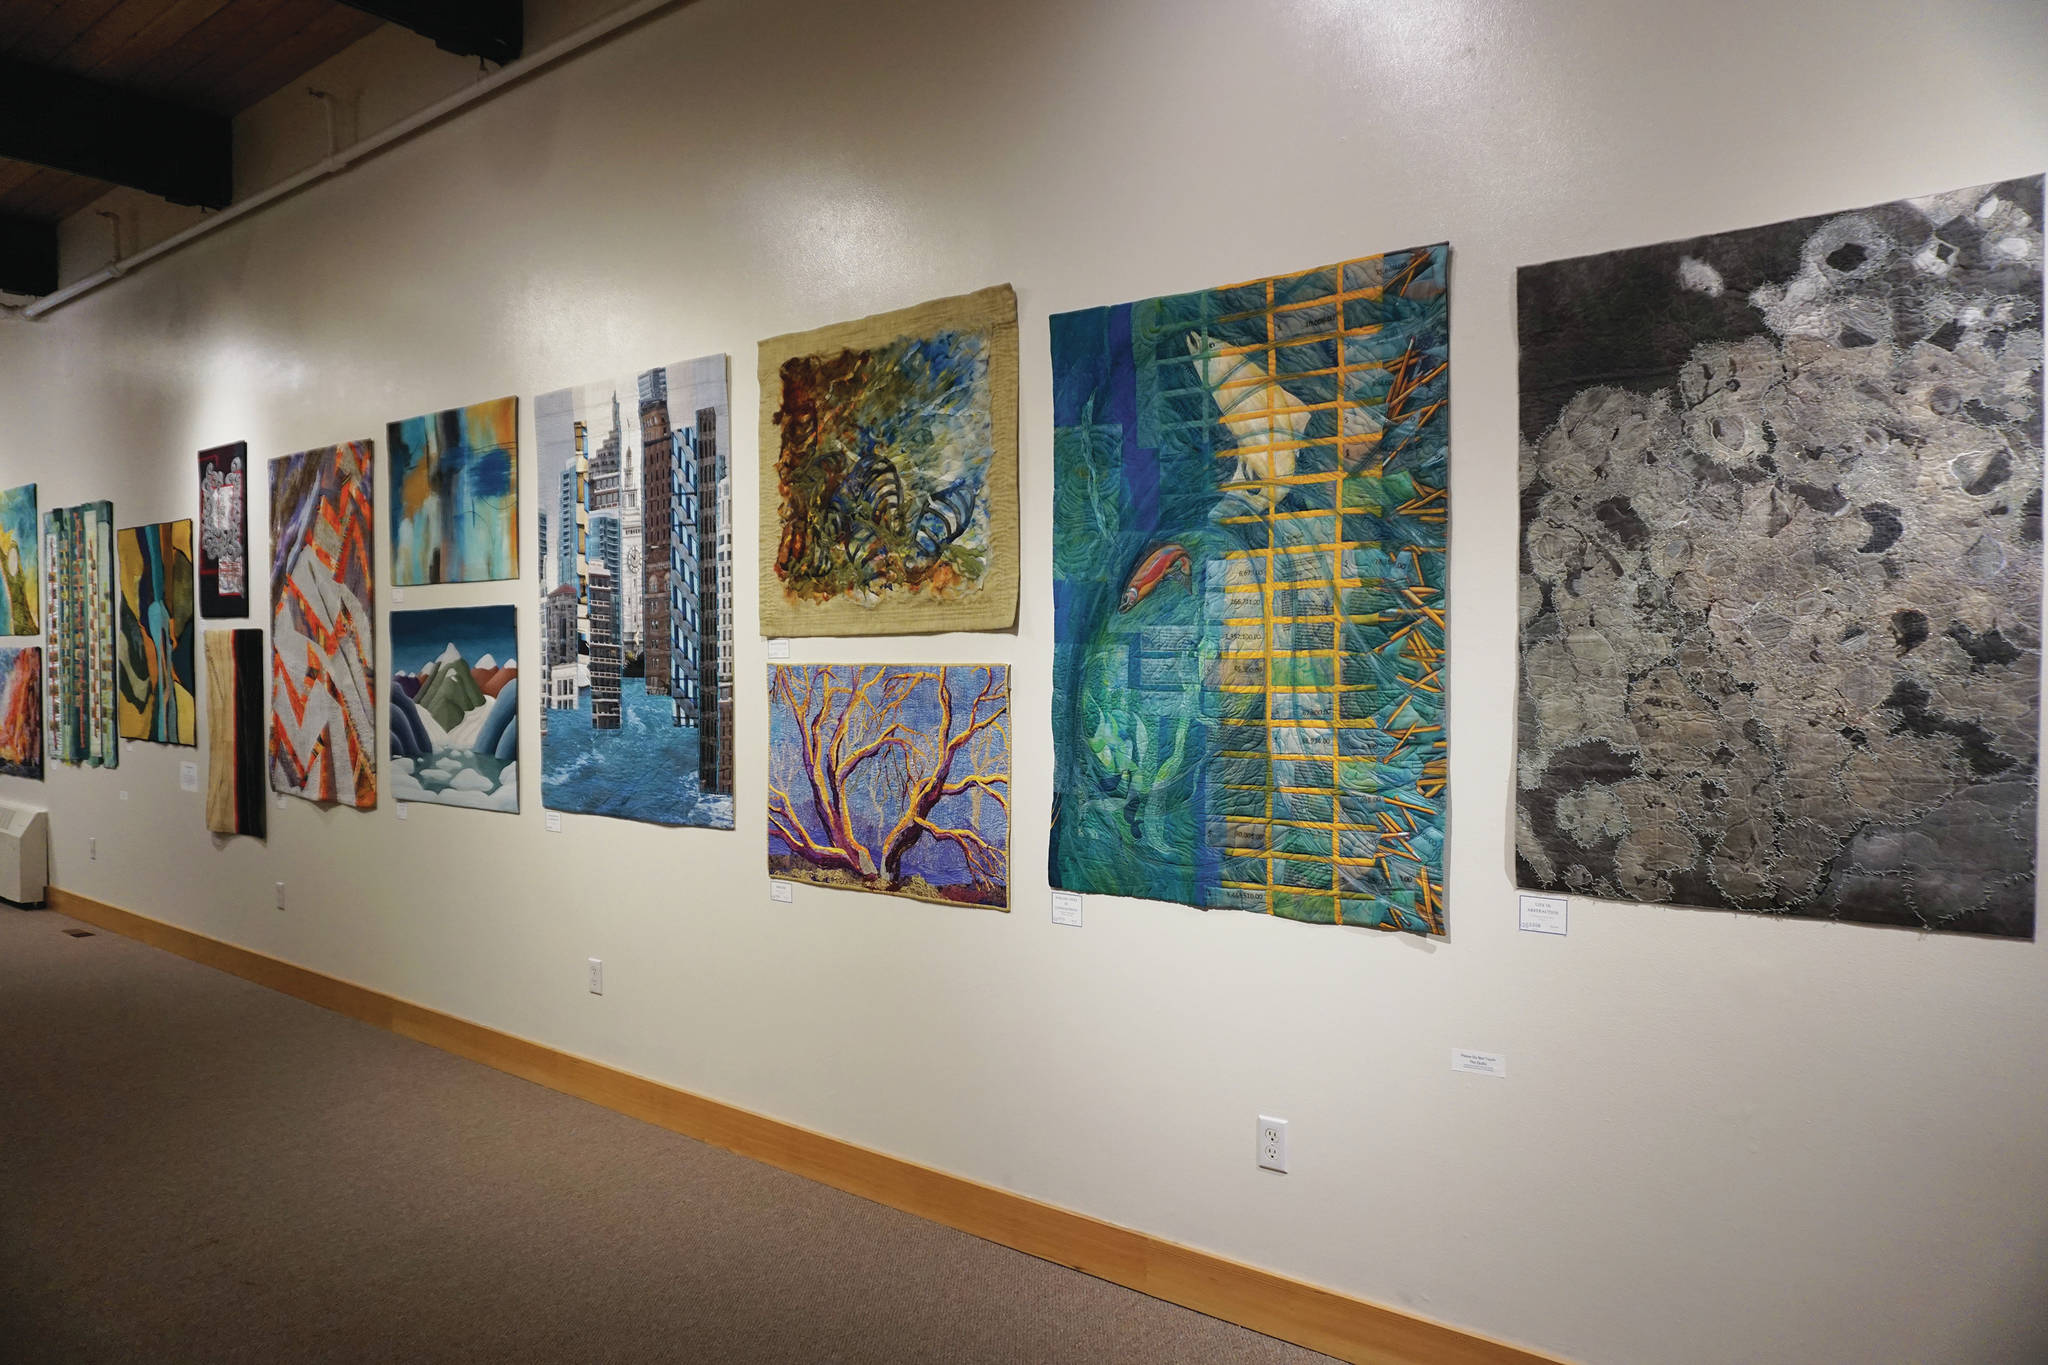 Some of the 45 art quilts featured in “Shifting Tides: Cloth in Convergence,” on exhibit from Oct. 9 to Nov. 28, 2020, at the Pratt Museum in Homer, Alaska. (Photo by Michael Armstrong/Homer News)